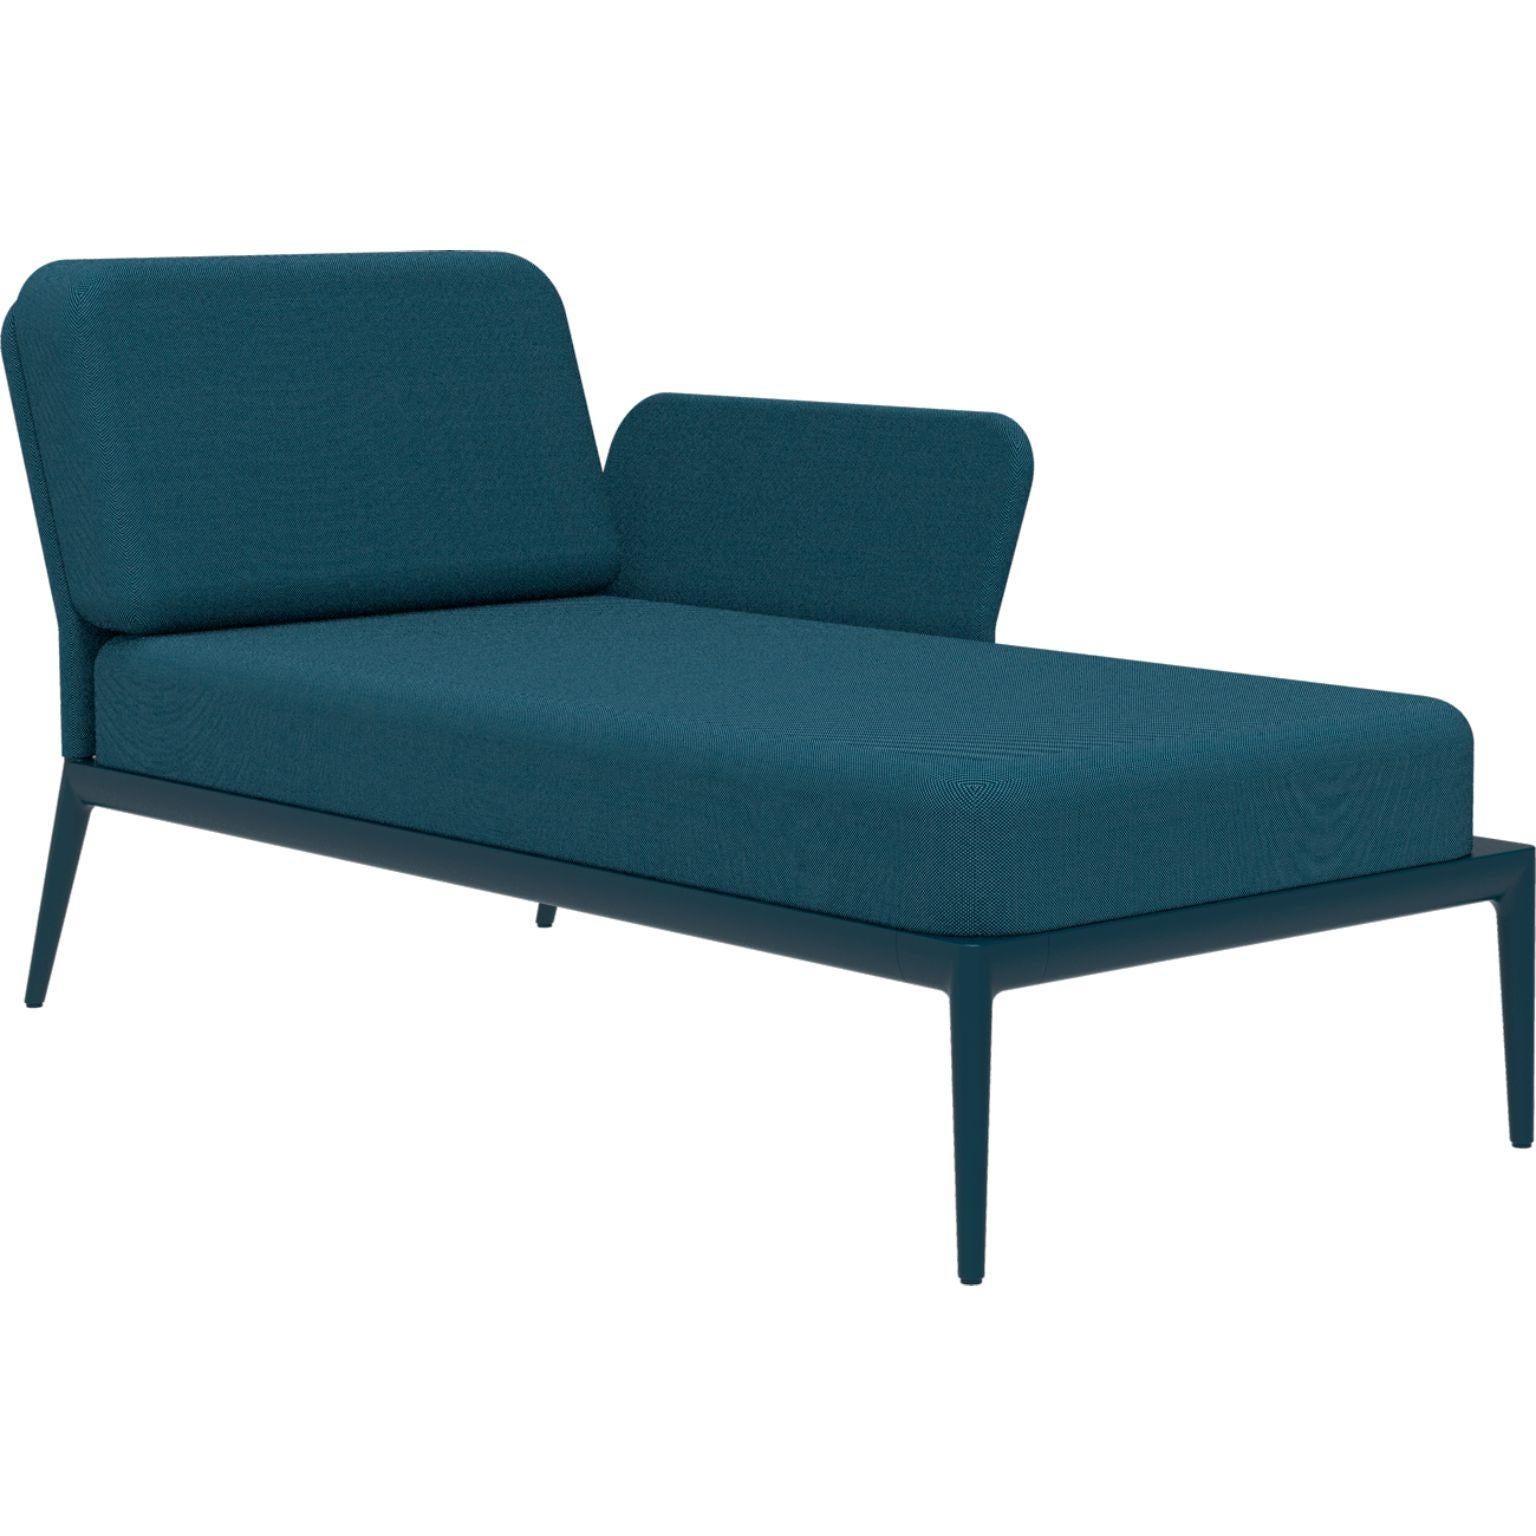 Cover Navy Left Chaise Longue by MOWEE
Dimensions: D80 x W155 x H81 cm (seat height 42 cm).
Material: Aluminum and upholstery.
Weight: 28 kg.
Also available in different colors and finishes. Please contact us.

An unmistakable collection for